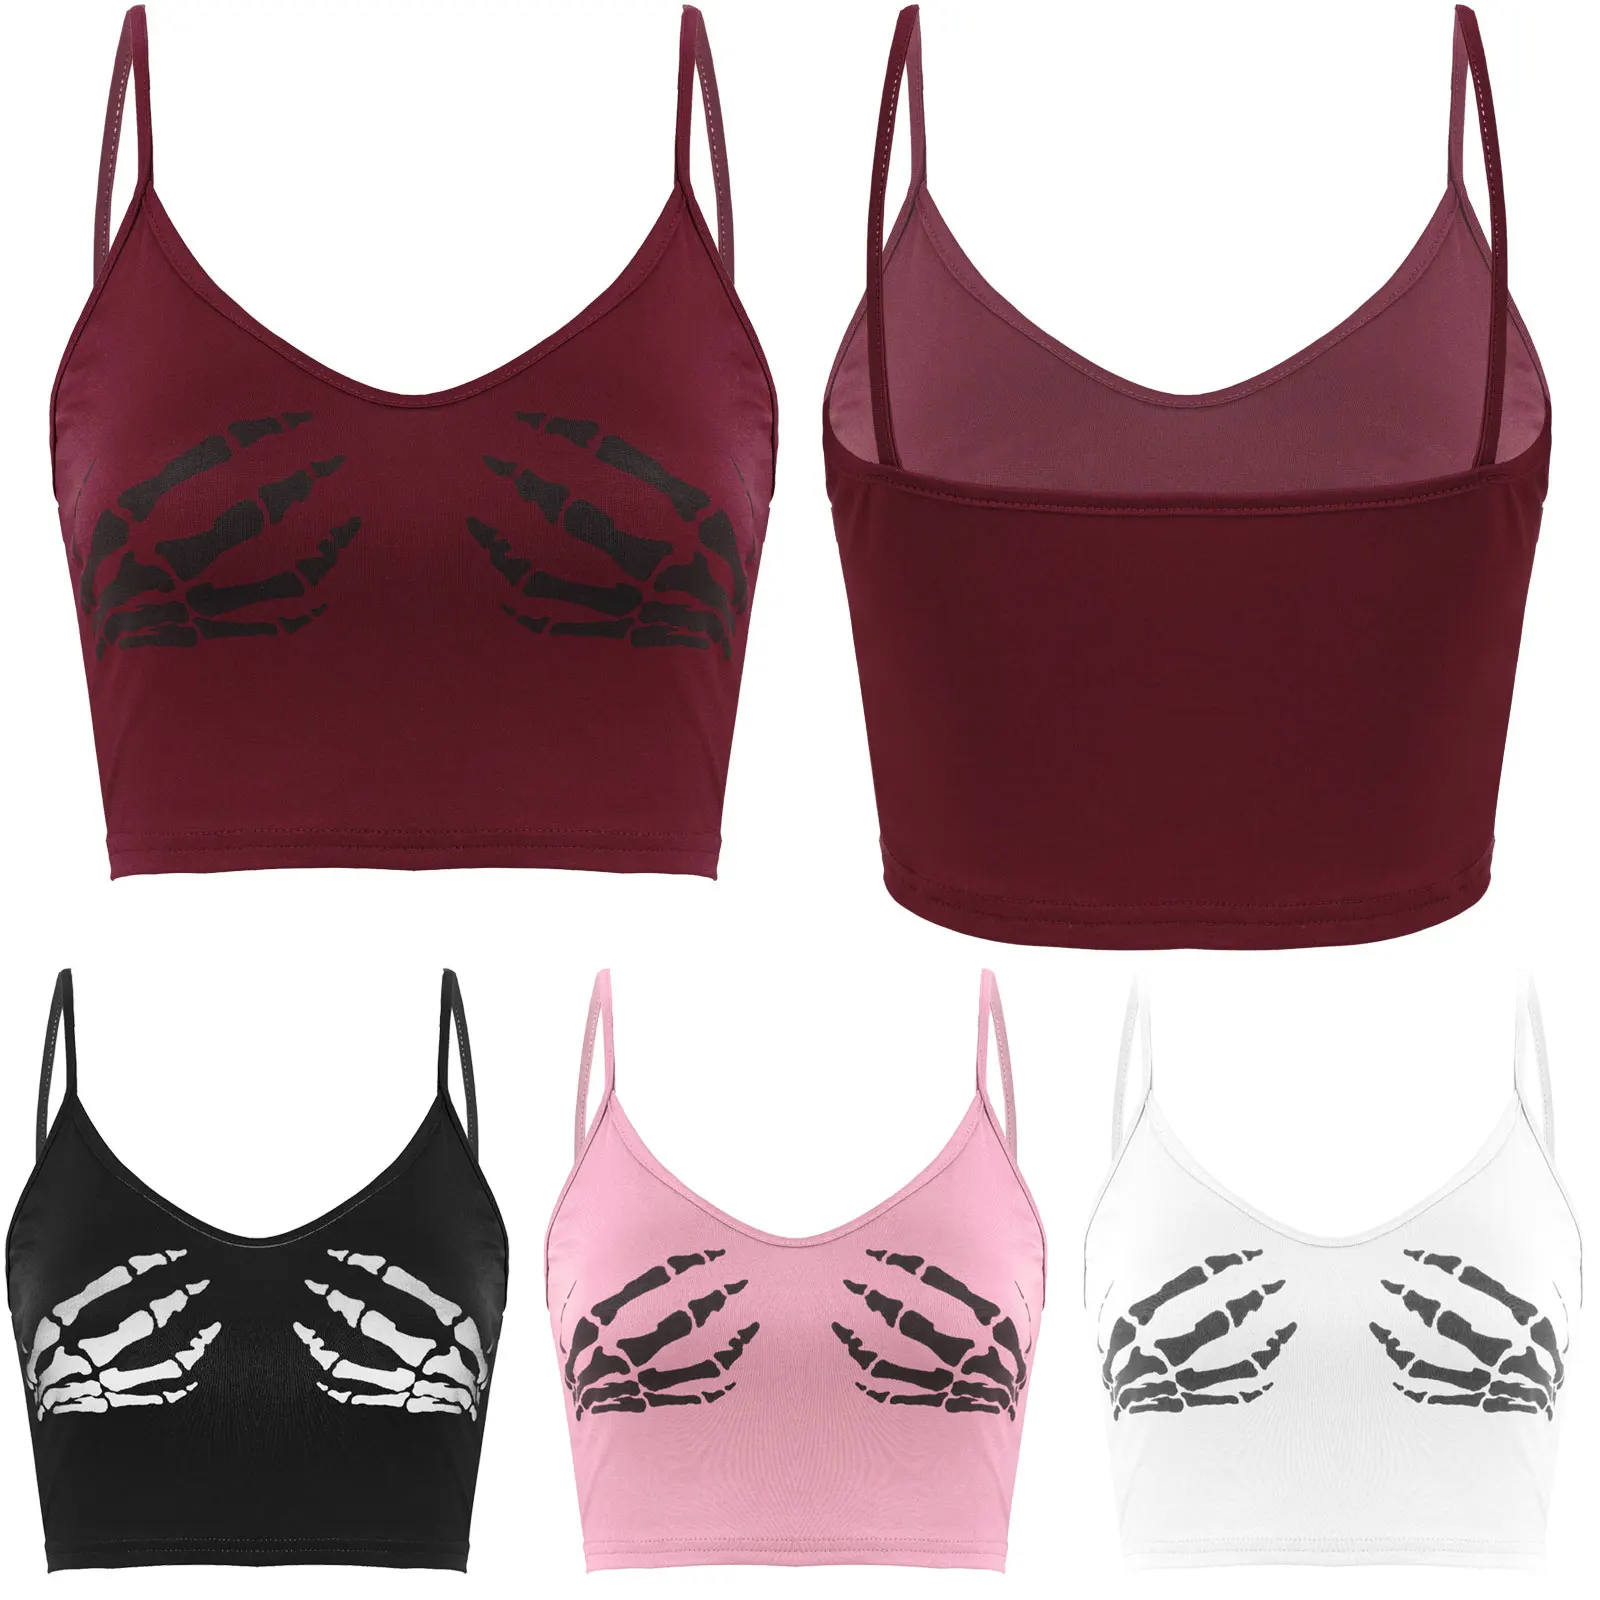 

Womens Human Skeleton Hand Printed Tank Tops Vest Sleeveless Camisole Summer Casual Shirt Crop Tops Camis Sexy Clubwear